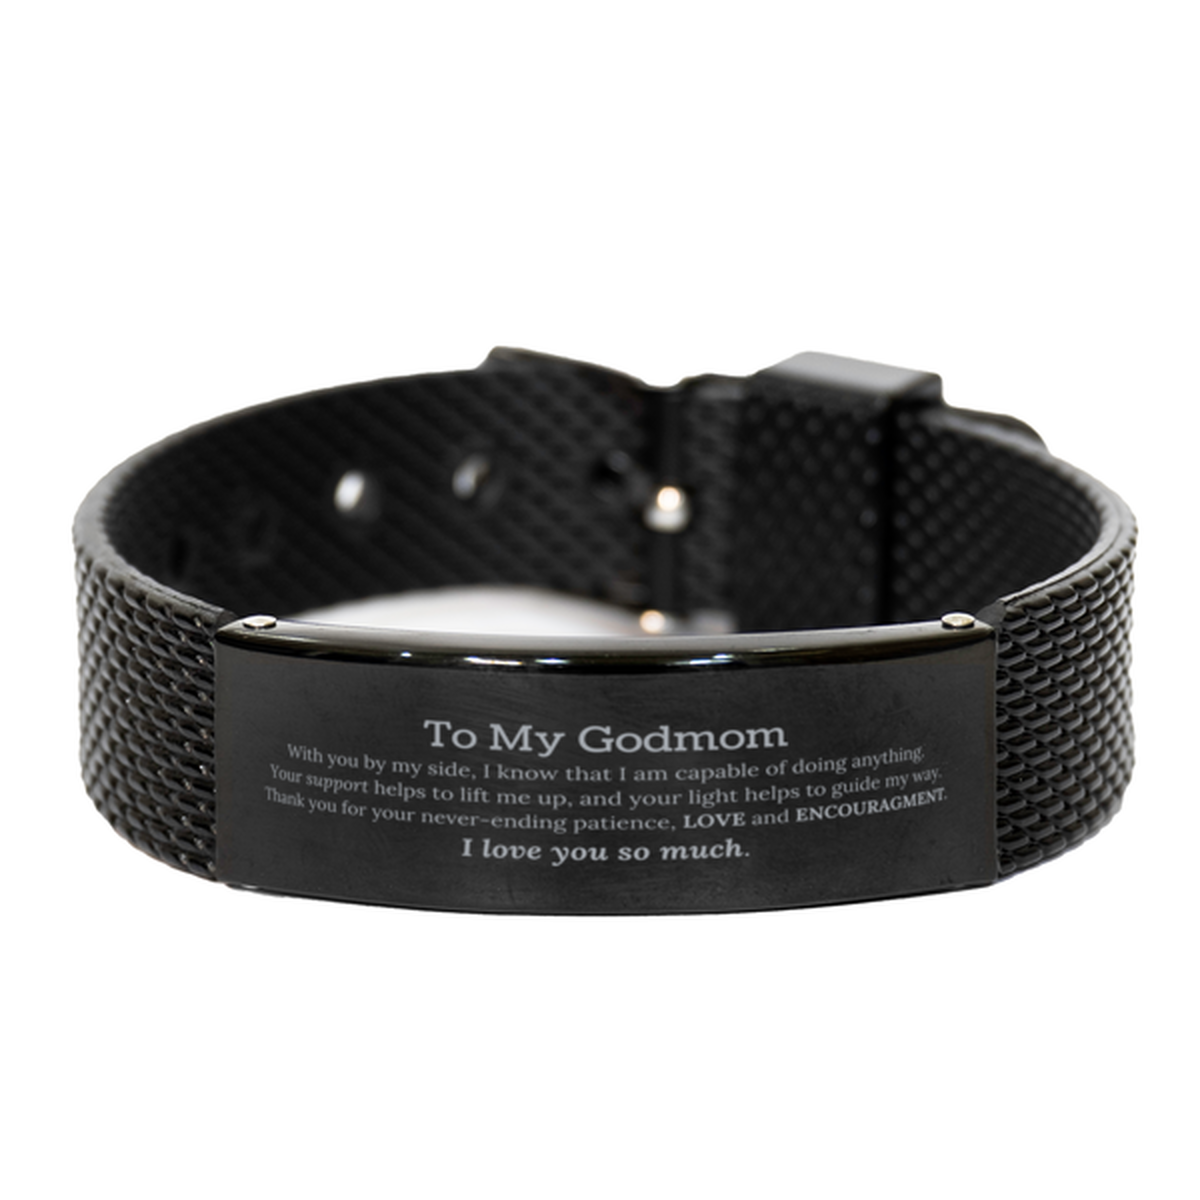 Appreciation Godmom Black Shark Mesh Bracelet Gifts, To My Godmom Birthday Christmas Wedding Keepsake Gifts for Godmom With you by my side, I know that I am capable of doing anything. I love you so much